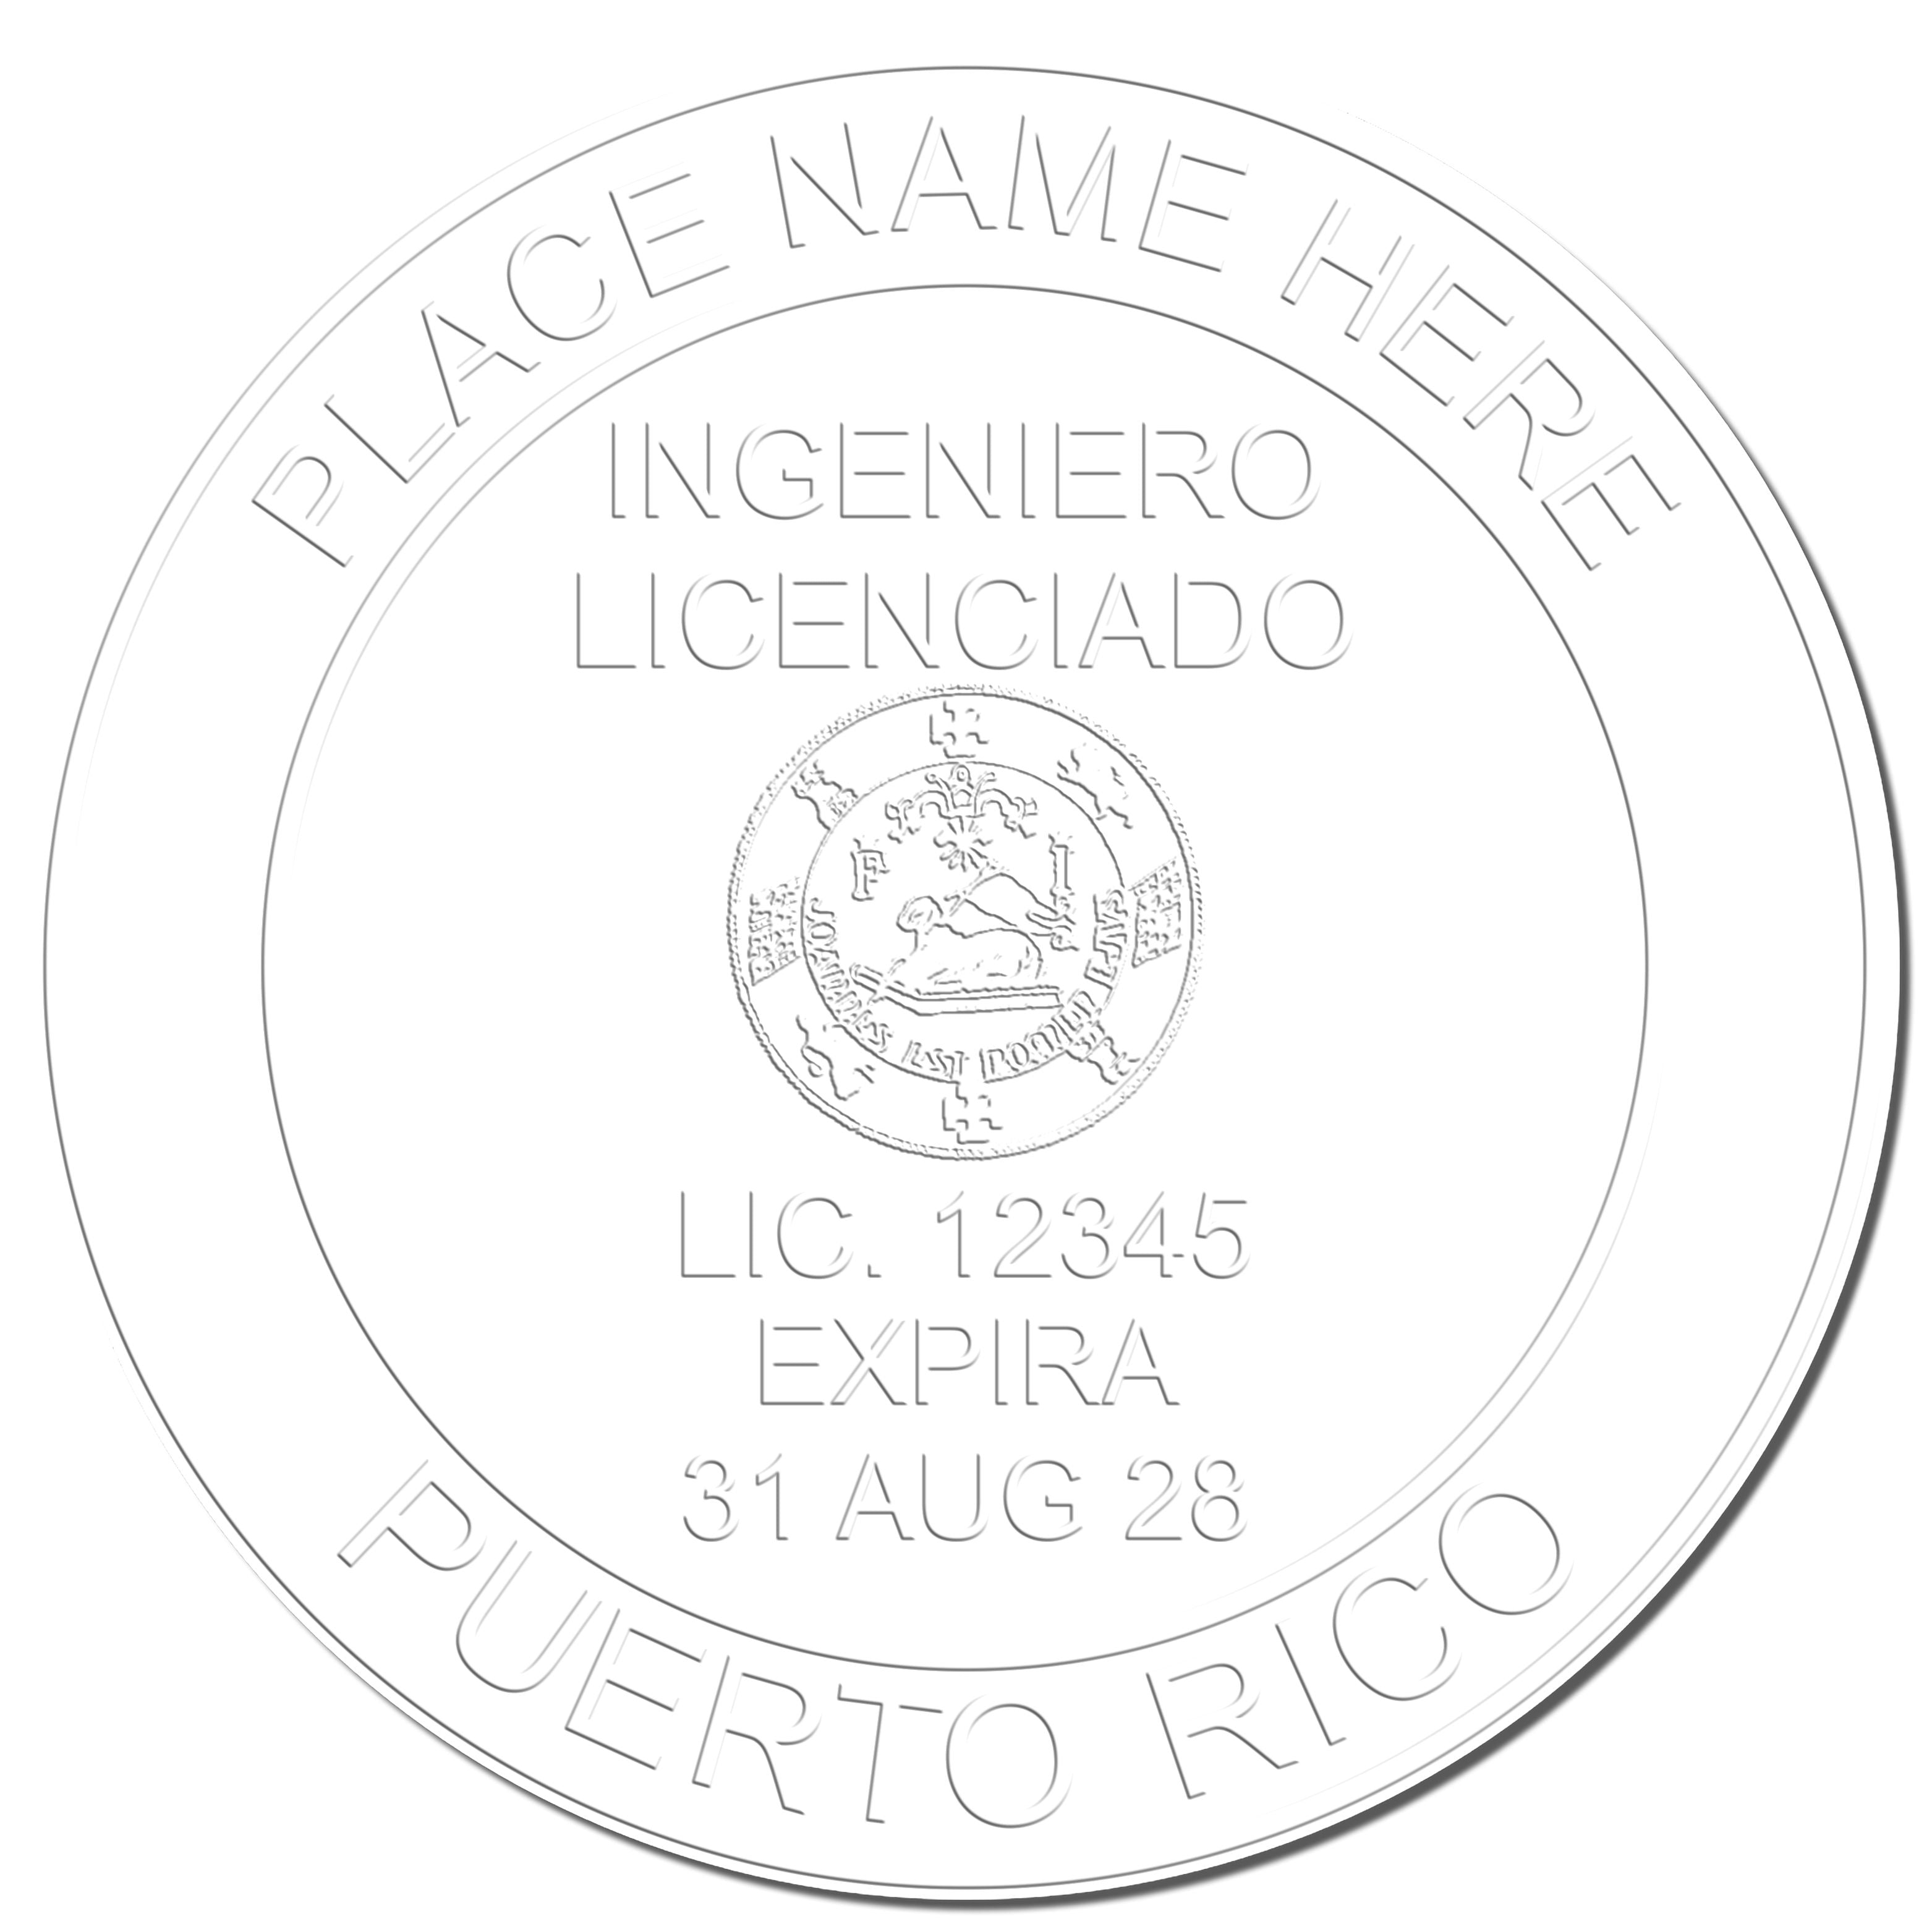 The Soft Puerto Rico Professional Engineer Seal stamp impression comes to life with a crisp, detailed photo on paper - showcasing true professional quality.